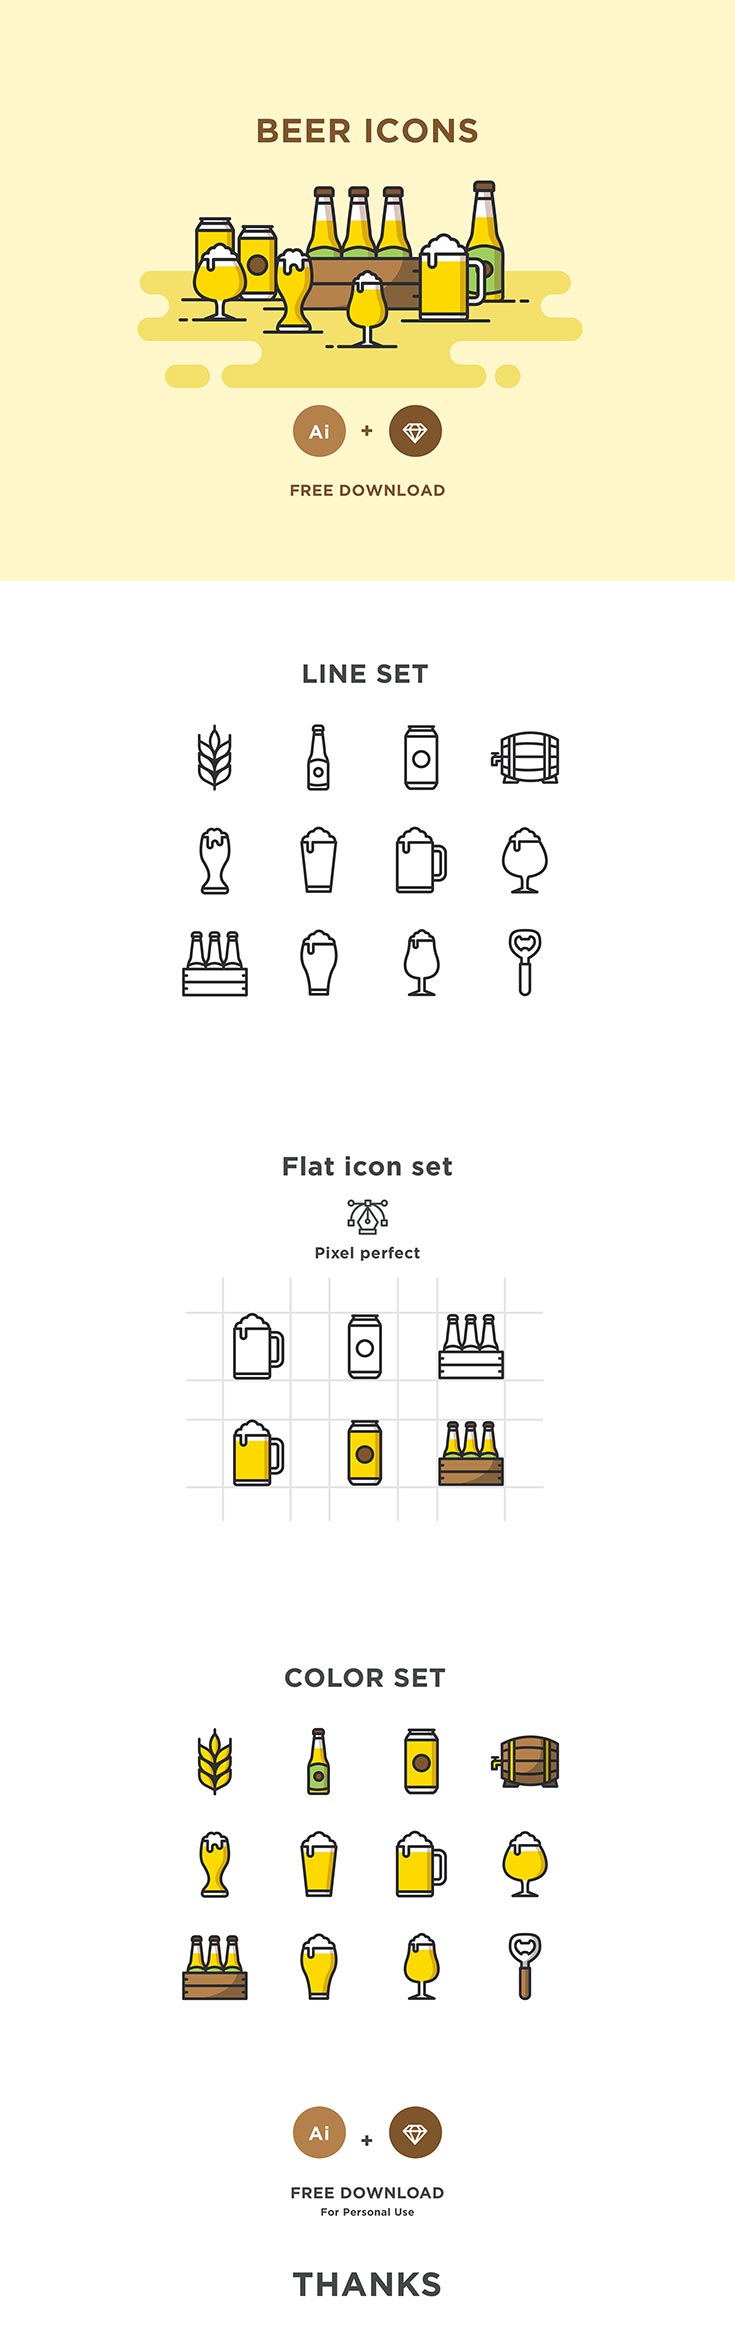 Free Beer Icons